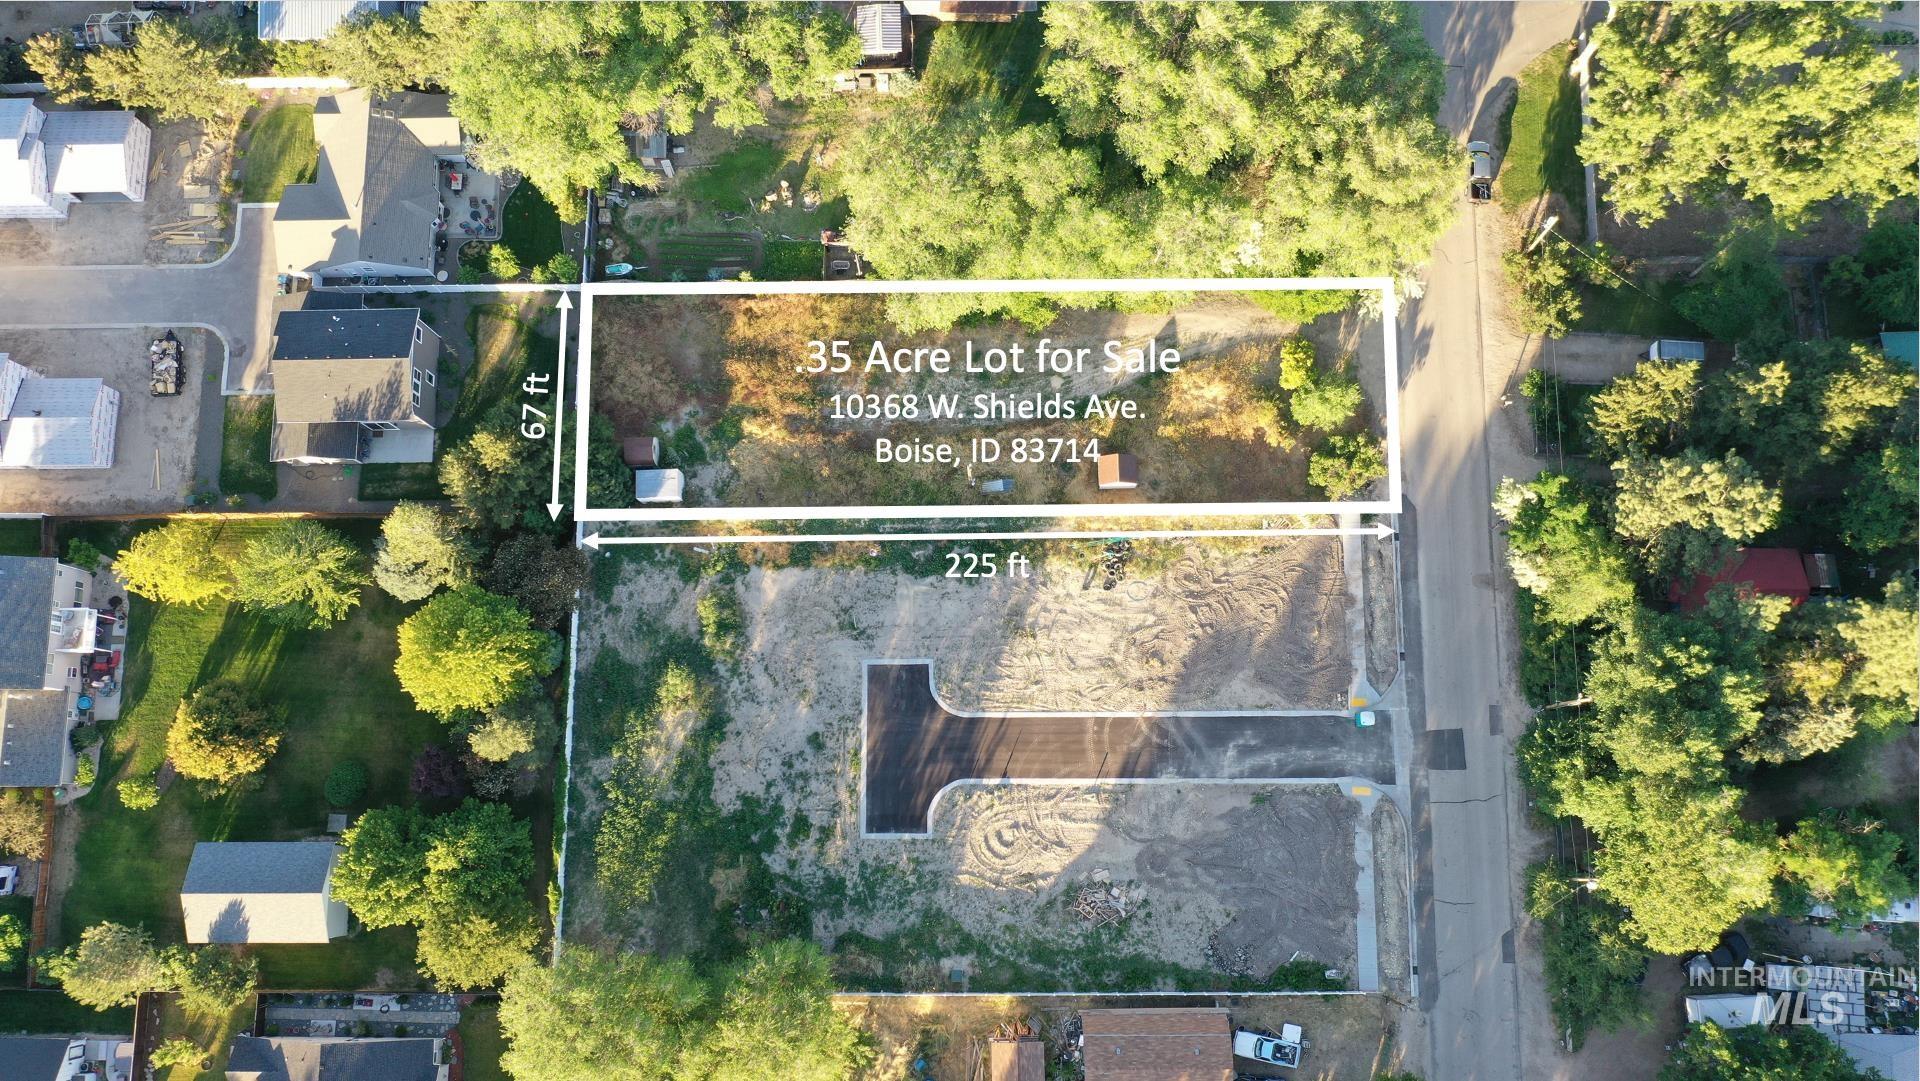 10368 Shields Ave, Boise, Idaho 83714, Land For Sale, Price $299,500, 98848807